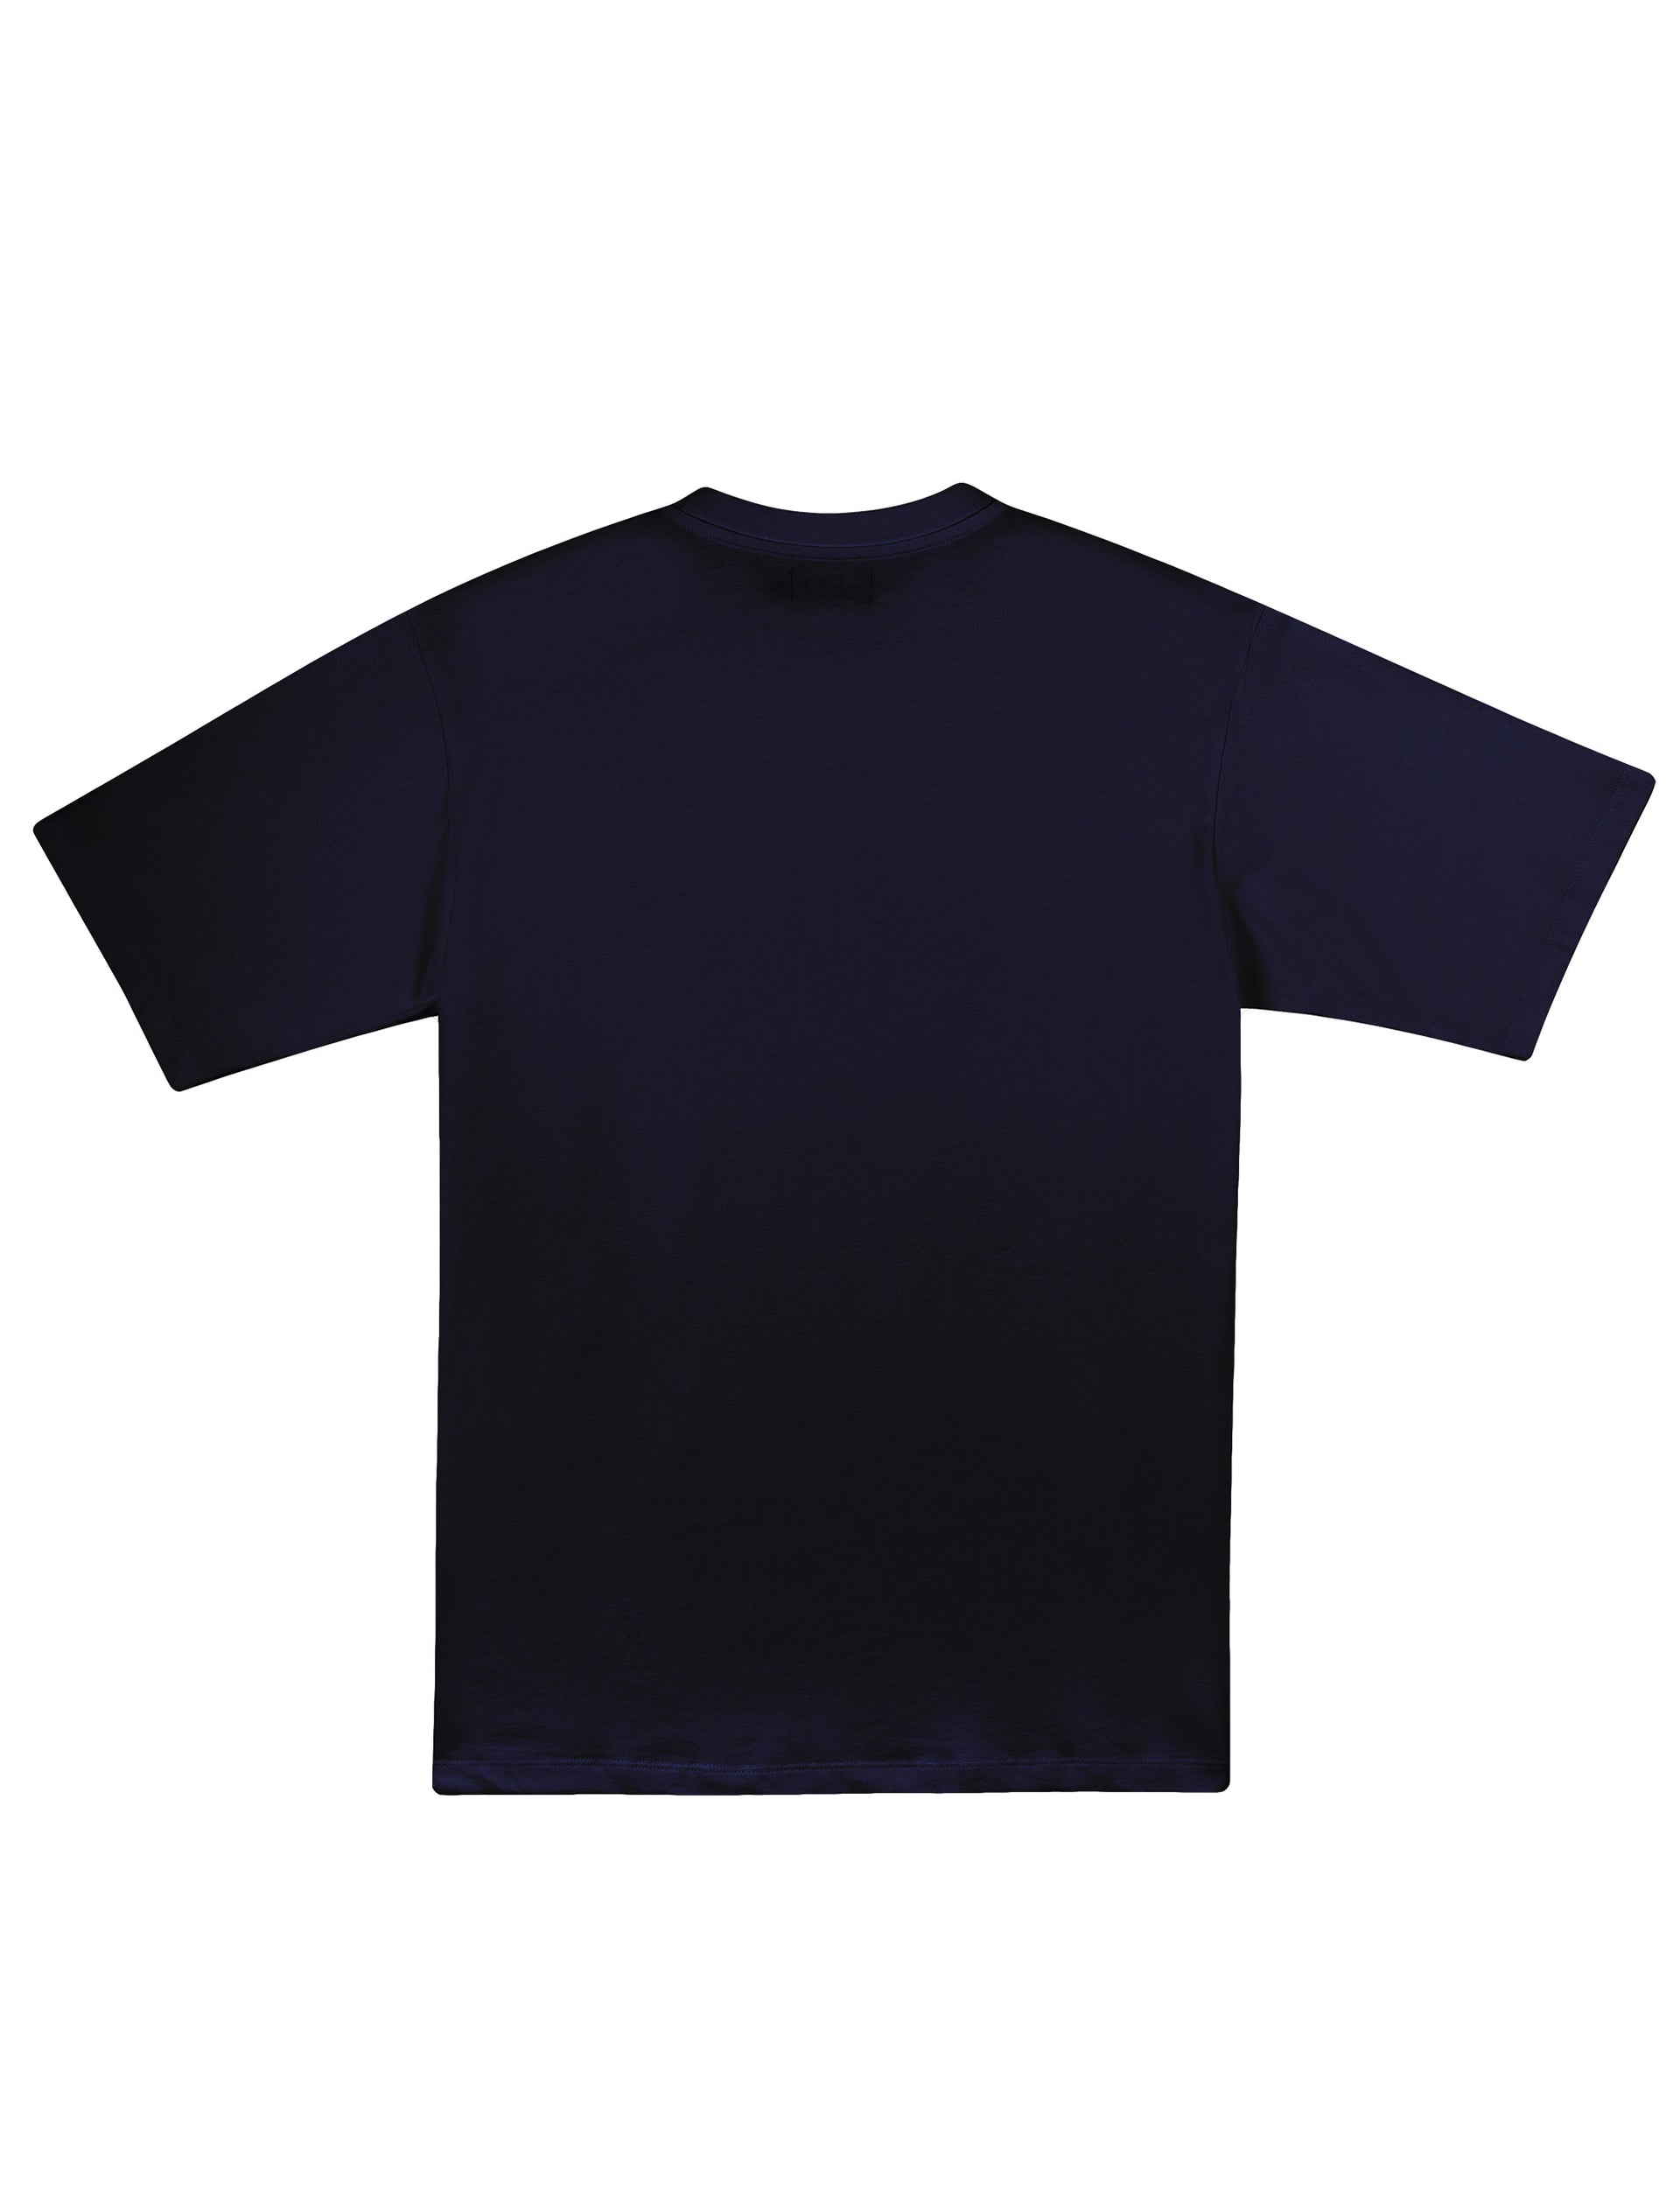 LATE CHECKOUT Fizzy Drink Navy Tee